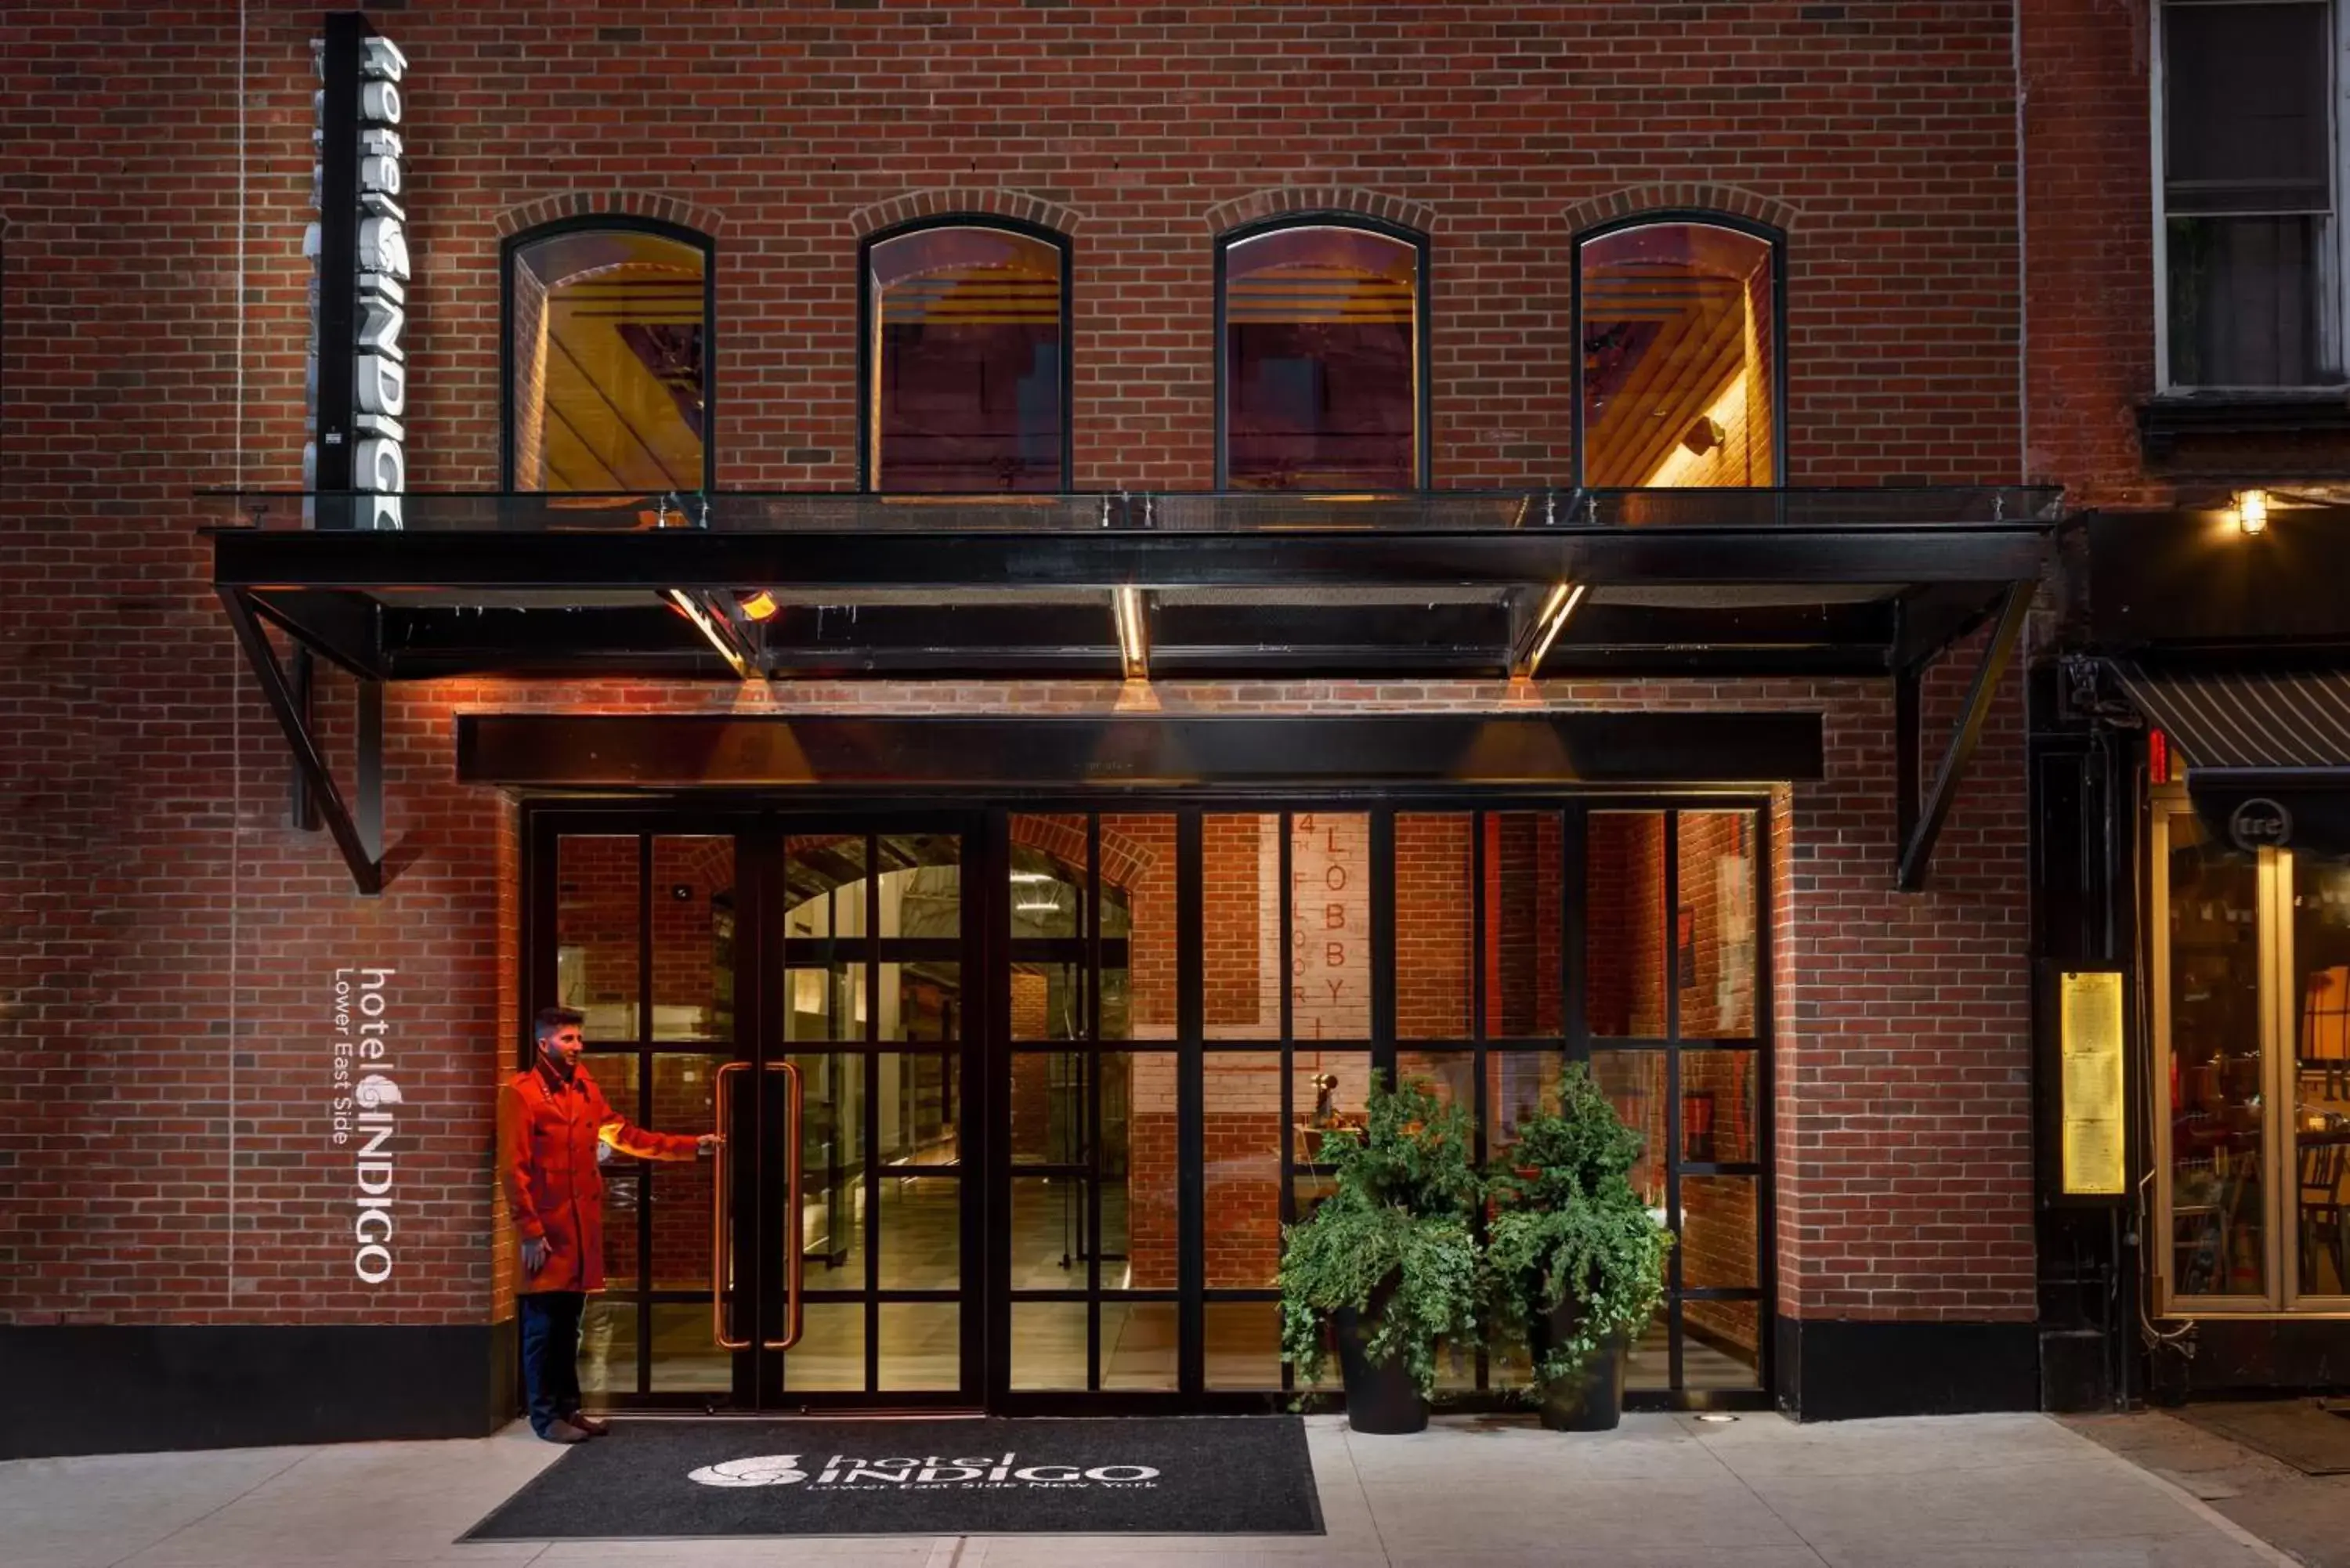 Property building in Hotel Indigo Lower East Side New York